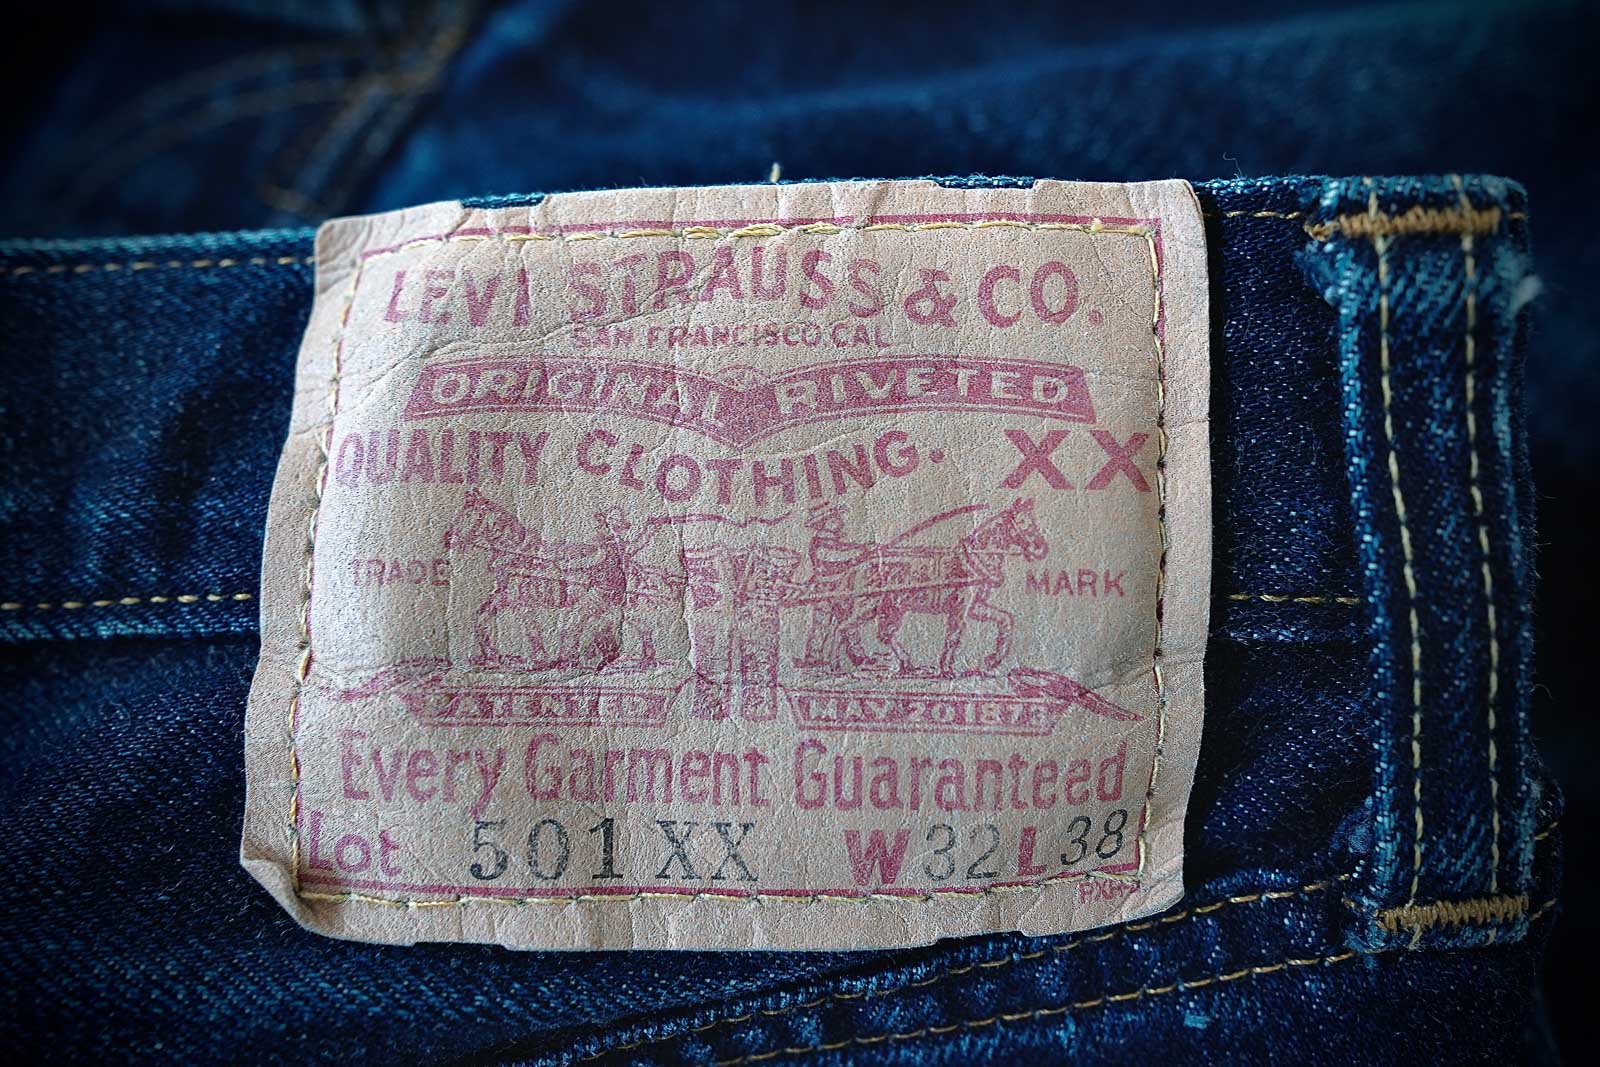 levis 508 jeans replacement